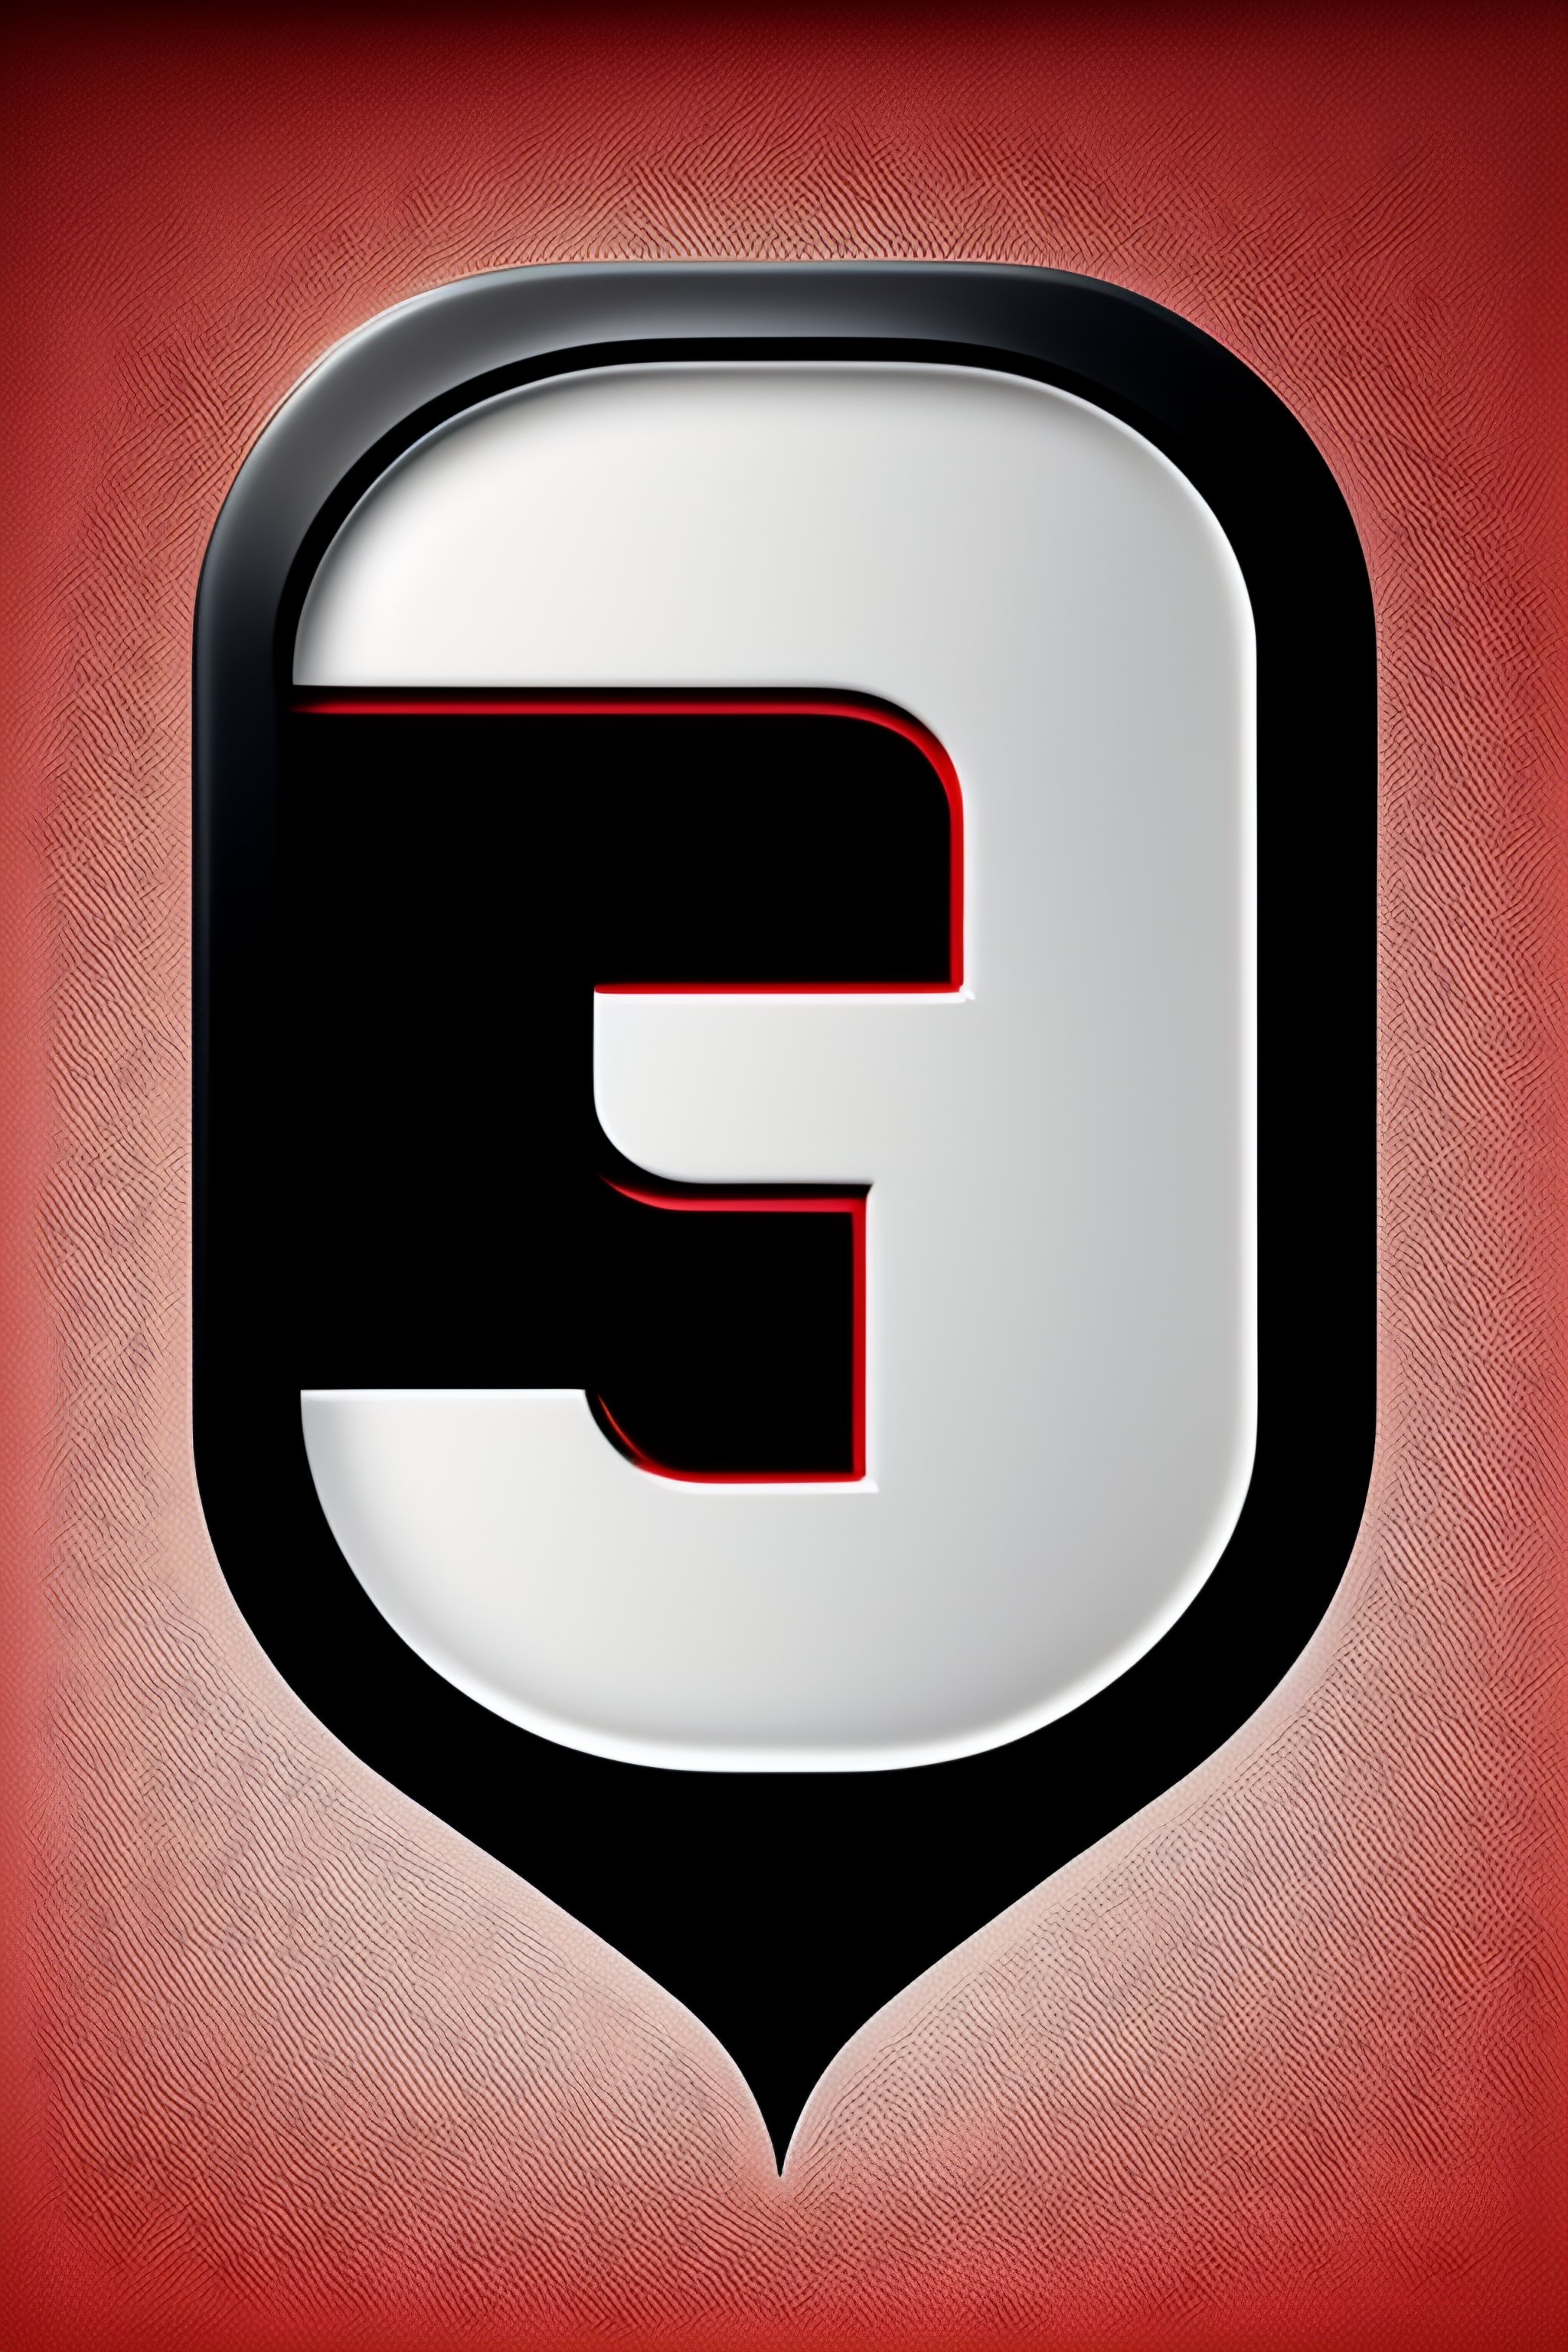 Lexica - Draw me an emblem with the letter s in red and black